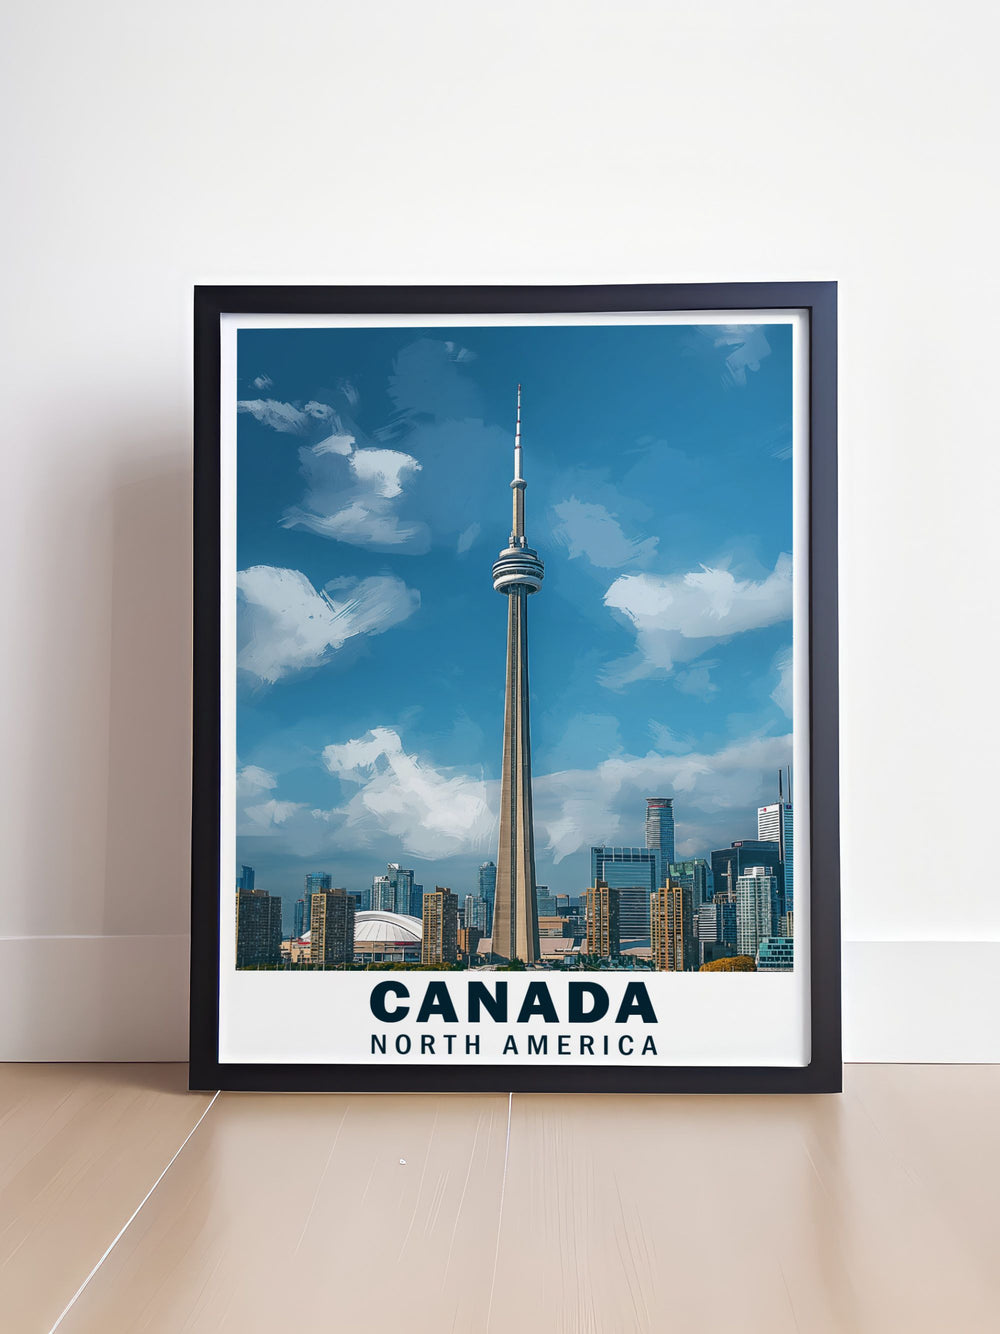 This travel poster captures the iconic CN Tower in Toronto, perfect for adding a touch of urban splendor to your home decor